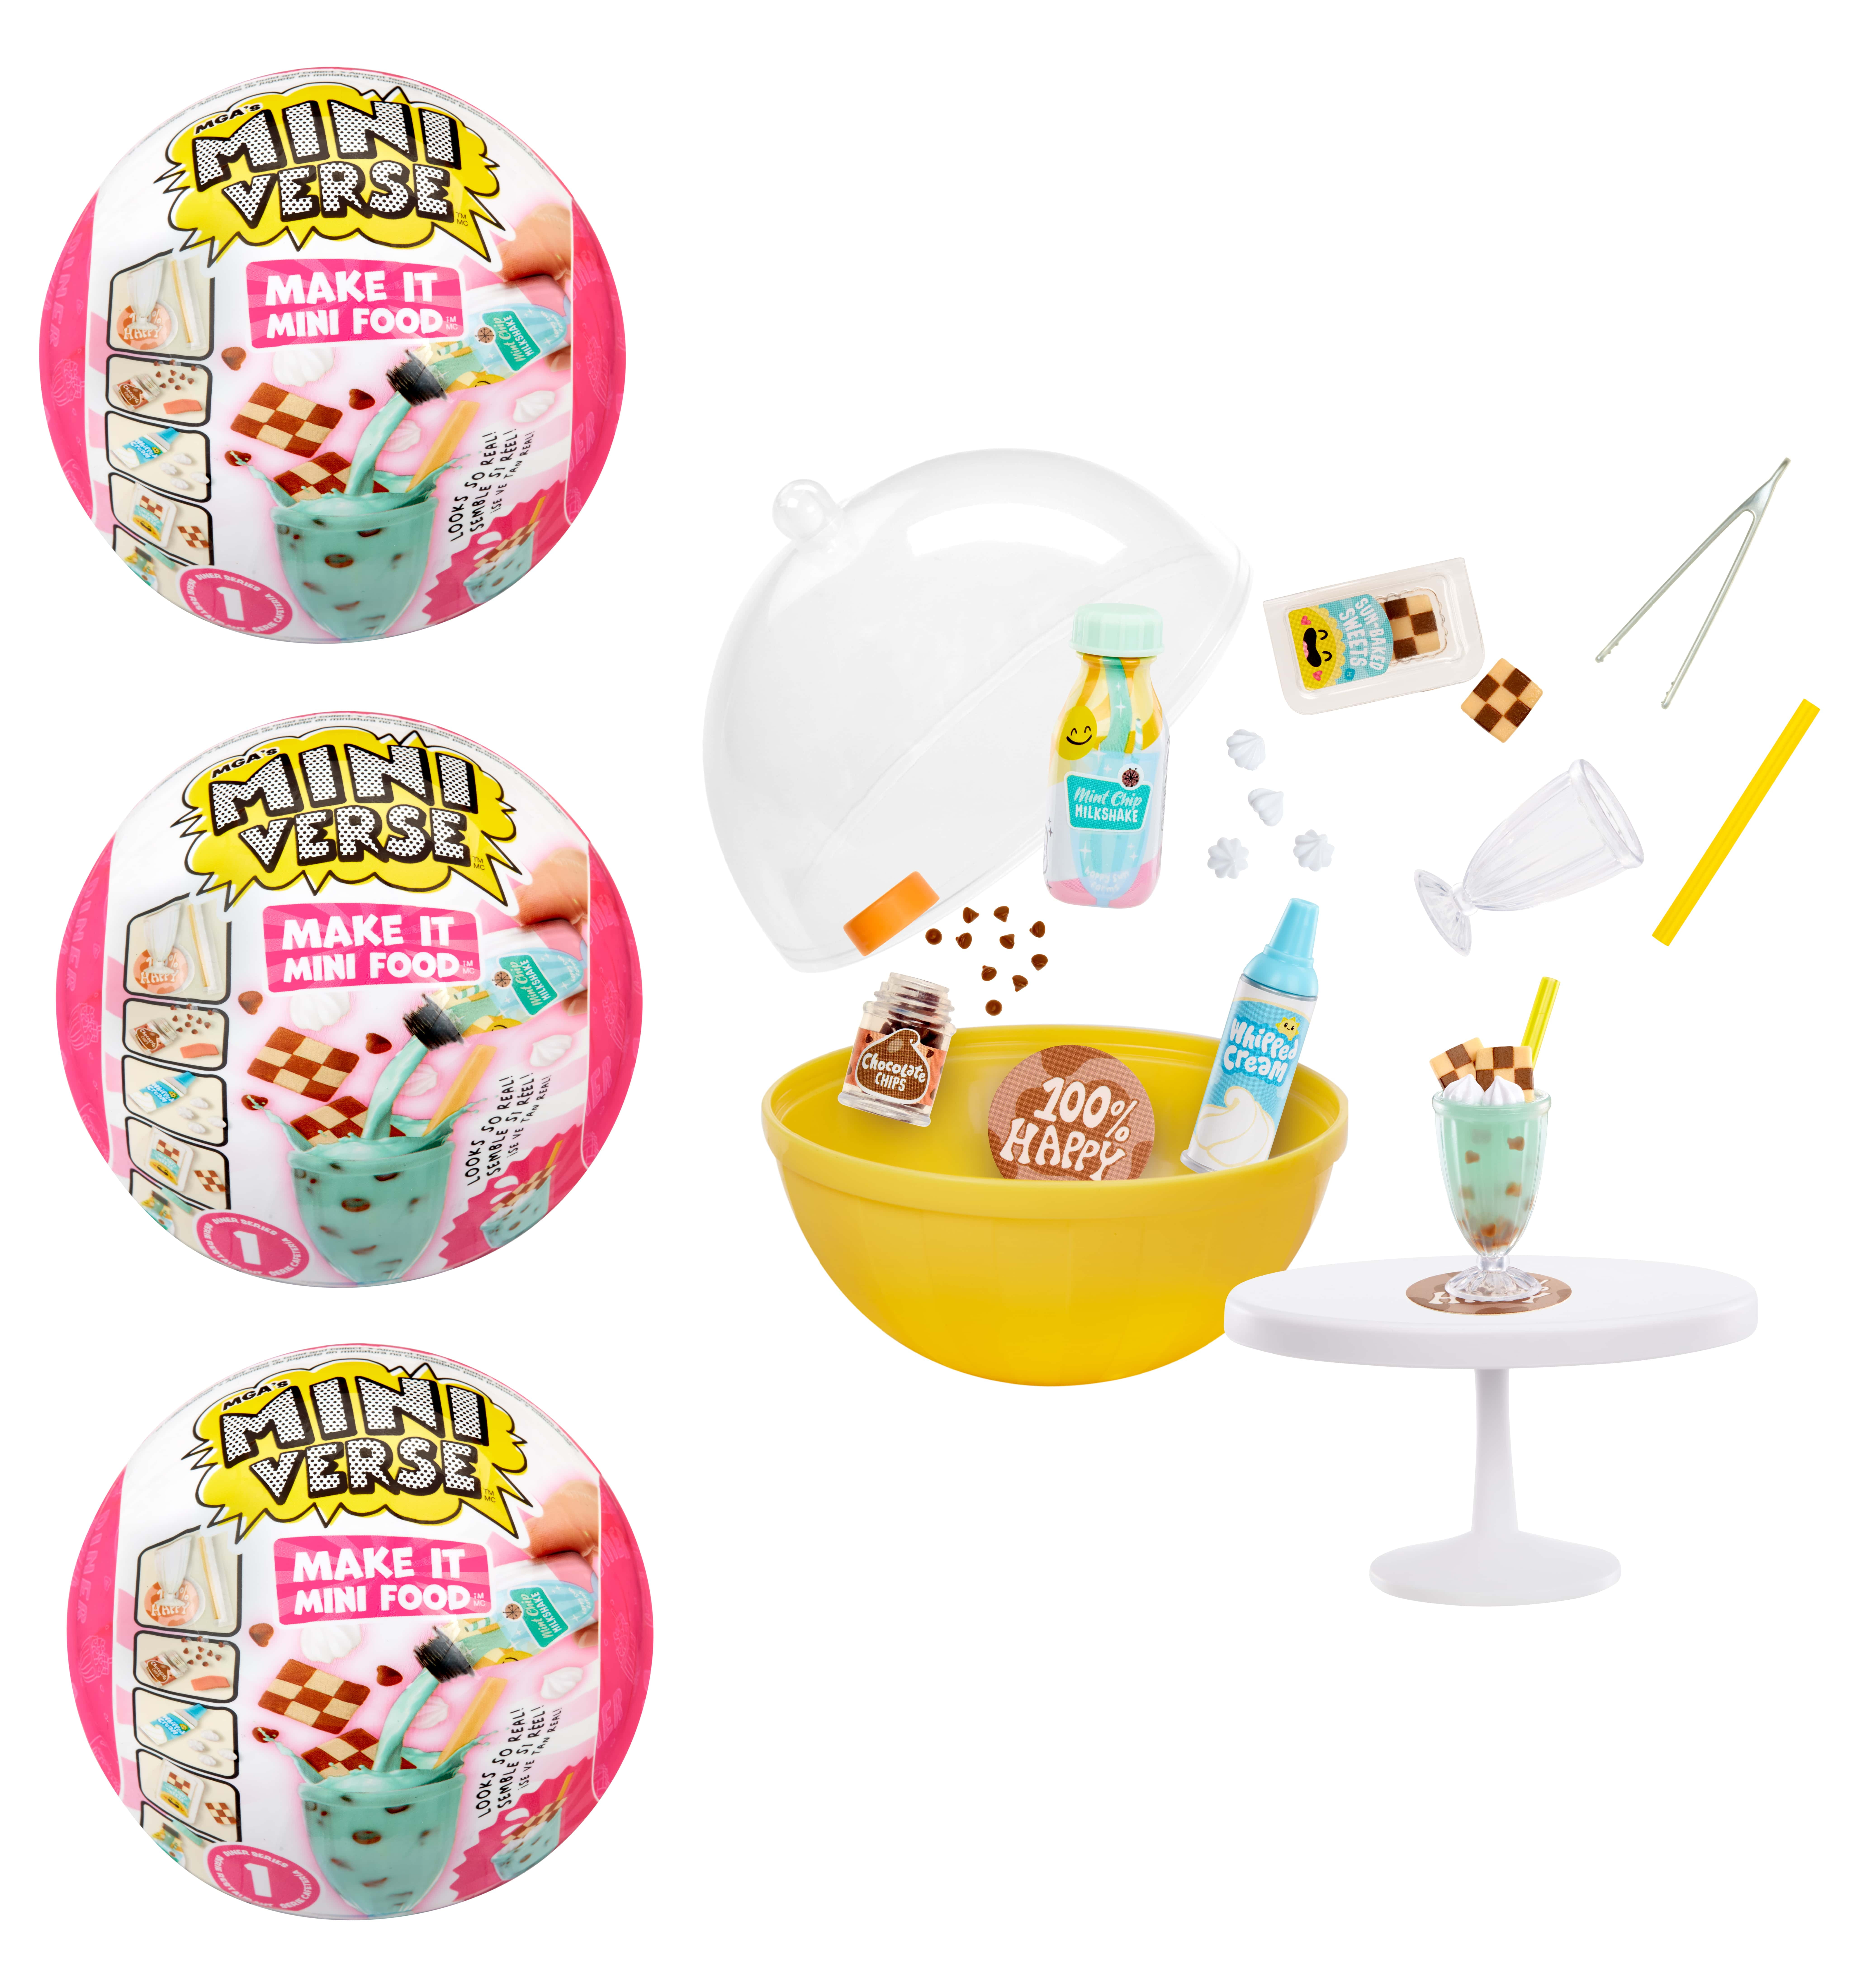 MGA's Miniverse Series 2 Make It Mini Food Diner - DIY Food Playset with UV  Light, Replica Food Ingredients, Blind Packaging, and Resin Play - Not  Edible - Suitable for Kids Ages